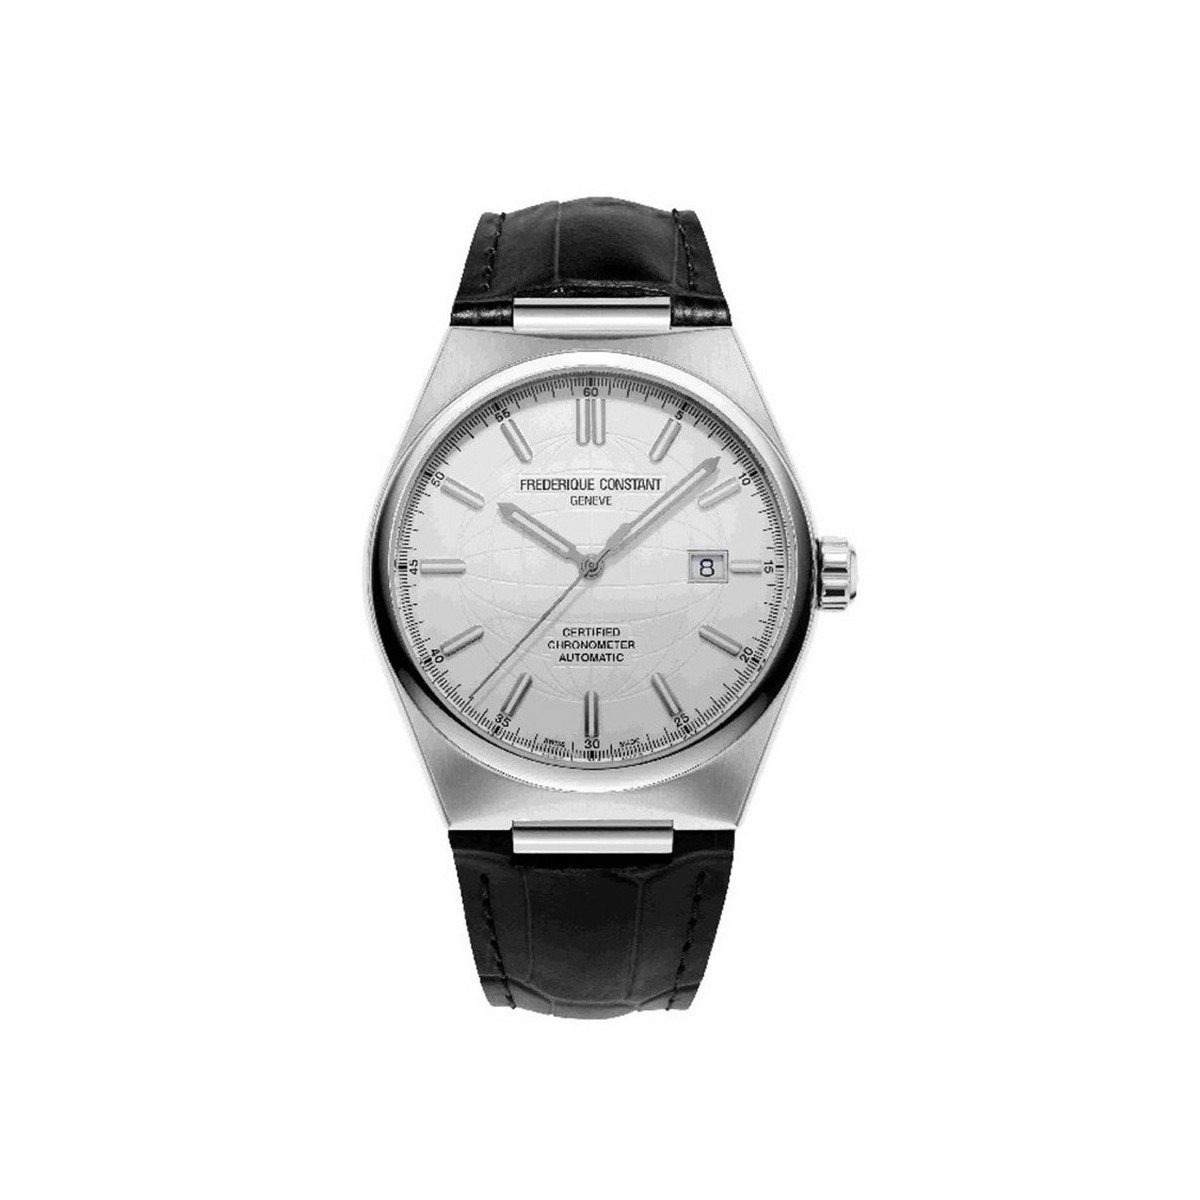 FREDERIQUE CONSTANT HIGHLIFE AUTOMATIC